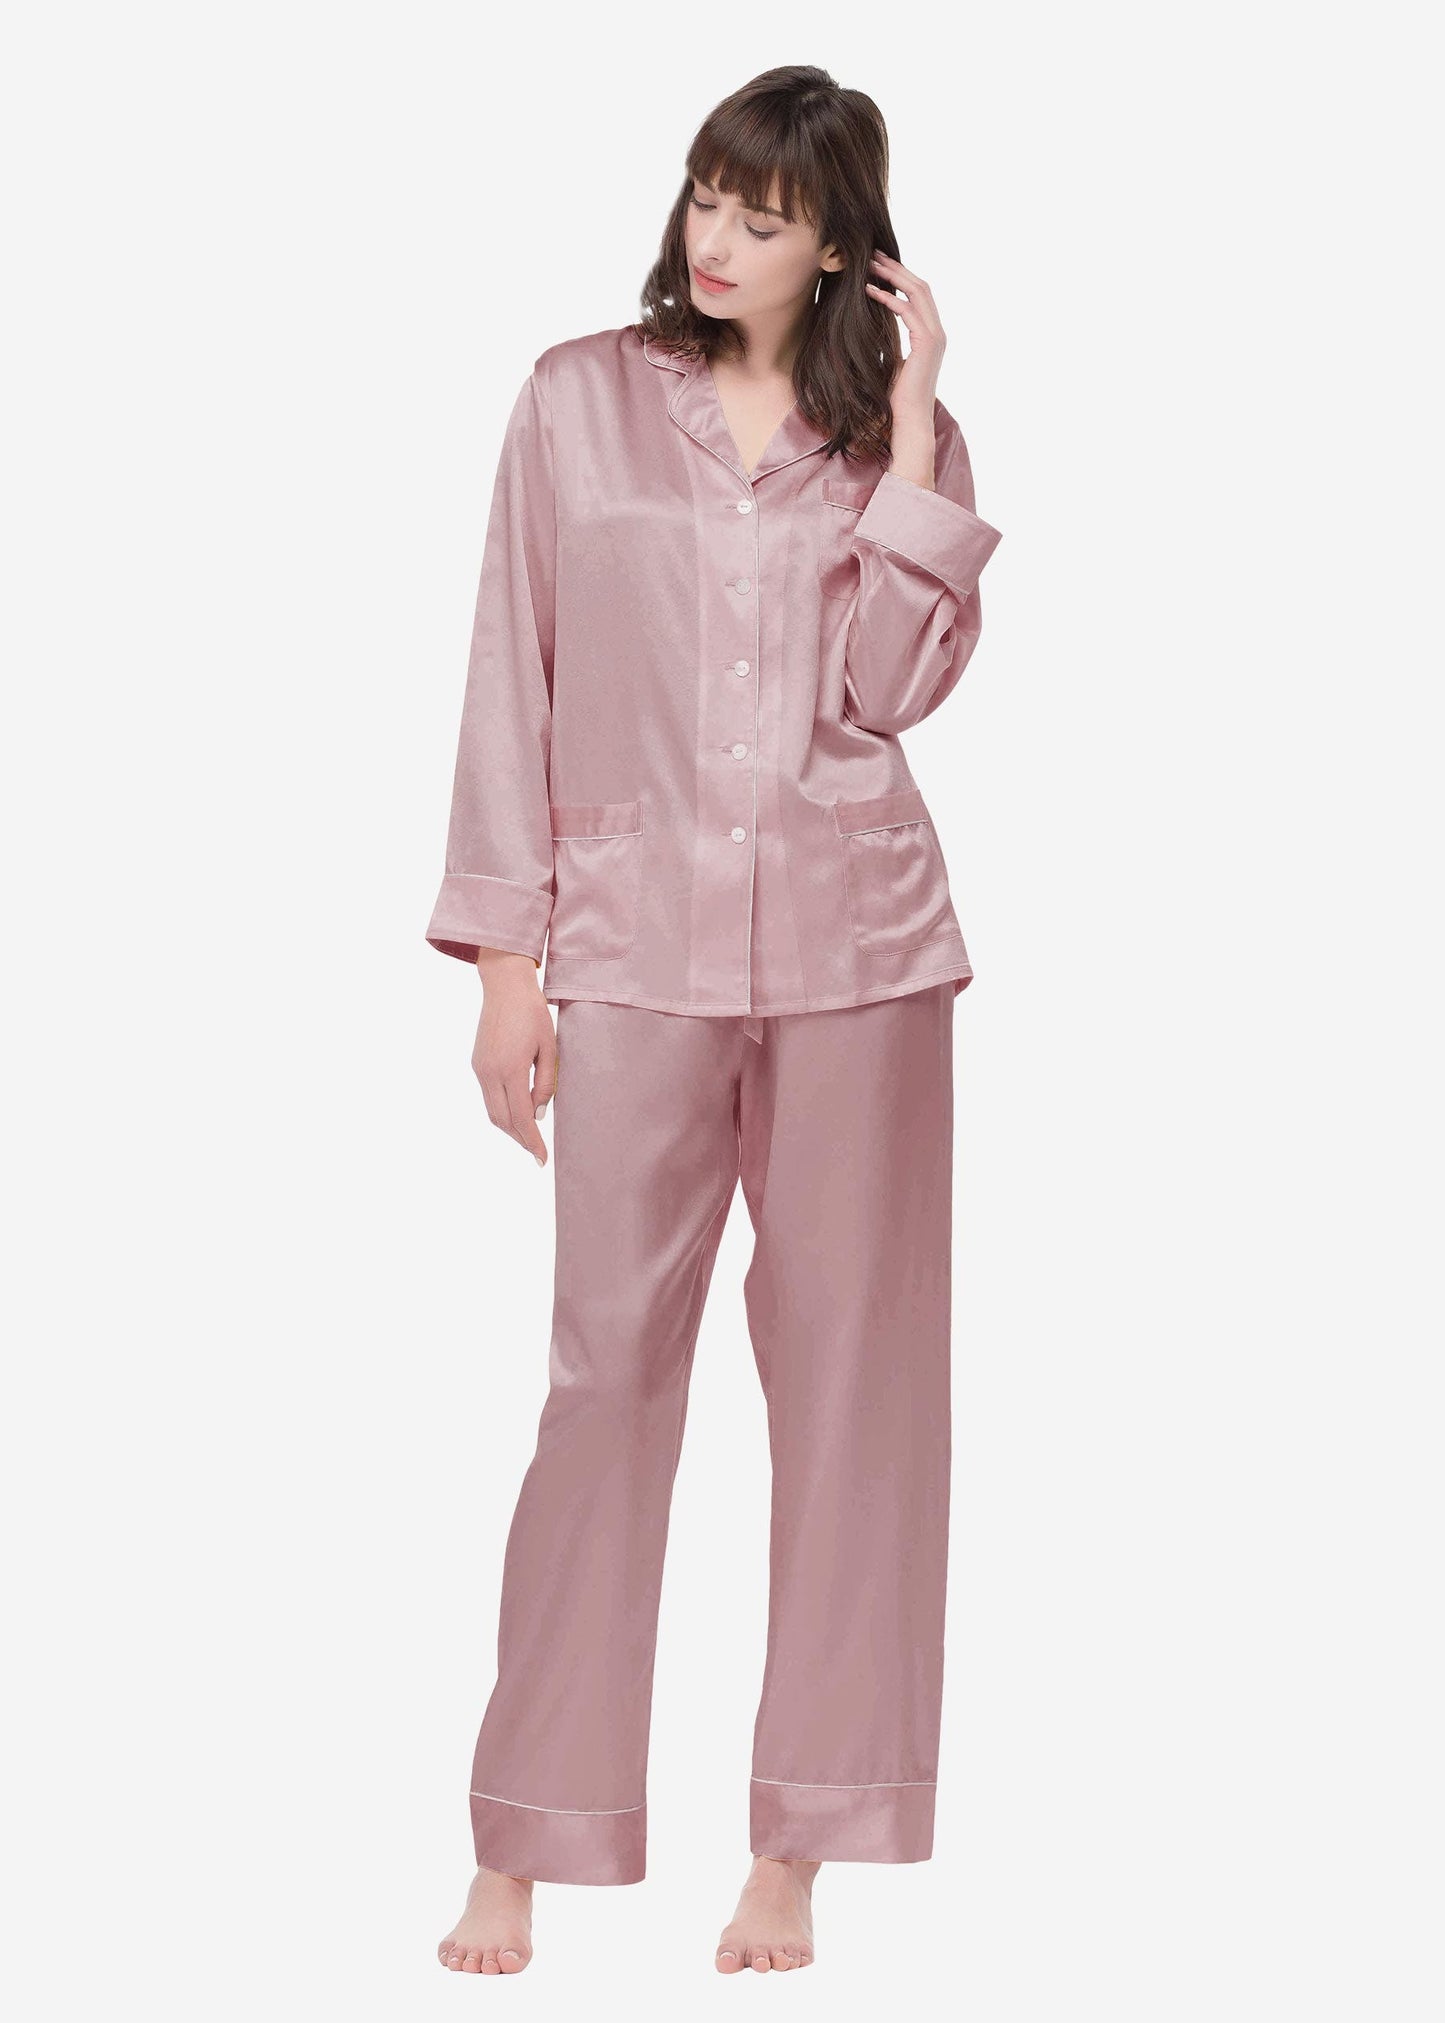 22 Momme Chic Trimmed women Silk Pajamas Set